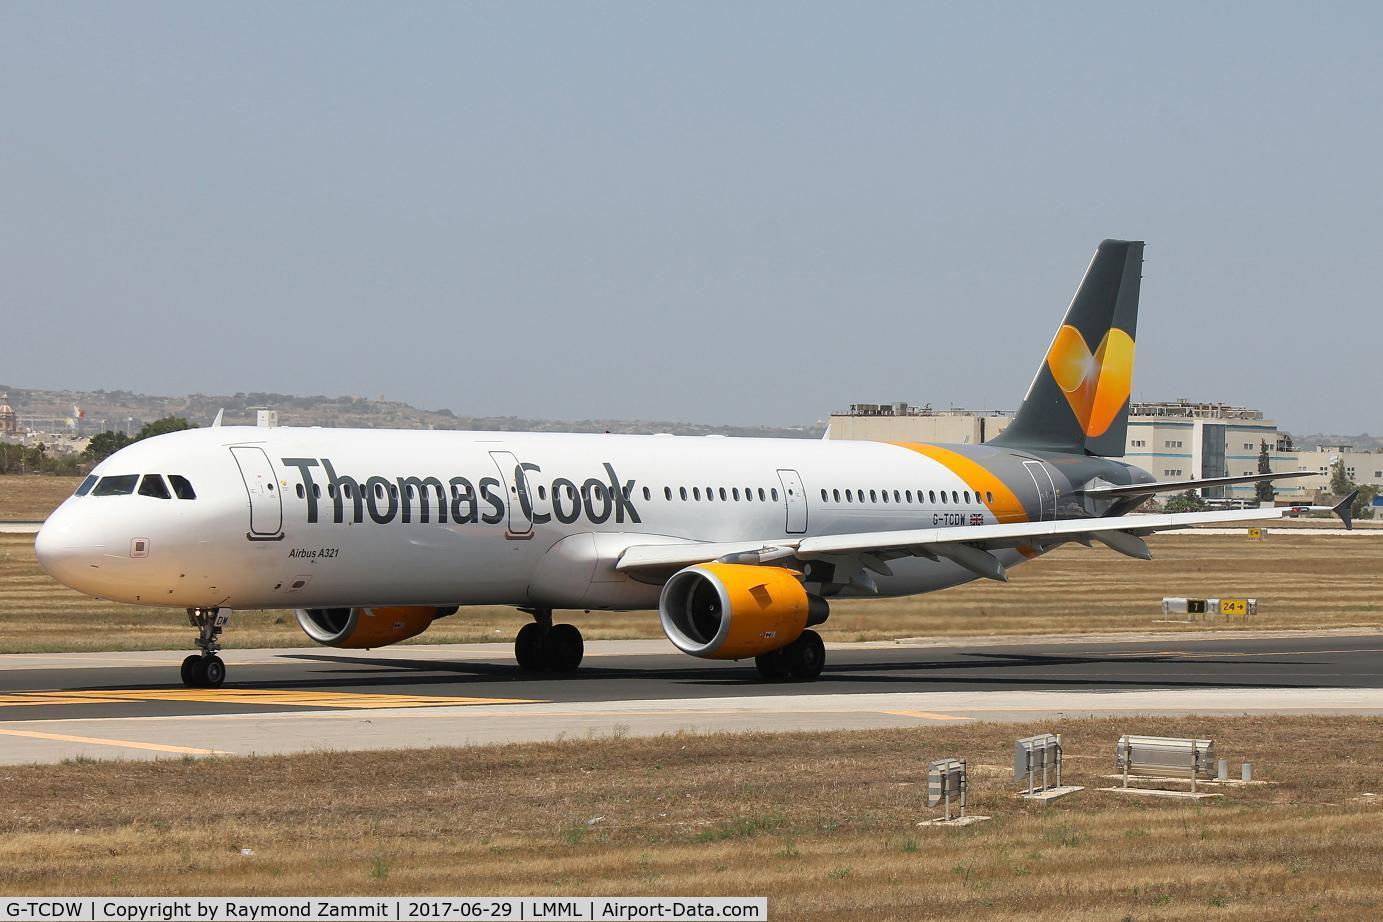 G-TCDW, 2003 Airbus A321-211 C/N 1921, A321 G-TCDW Thomas Cook Airlines